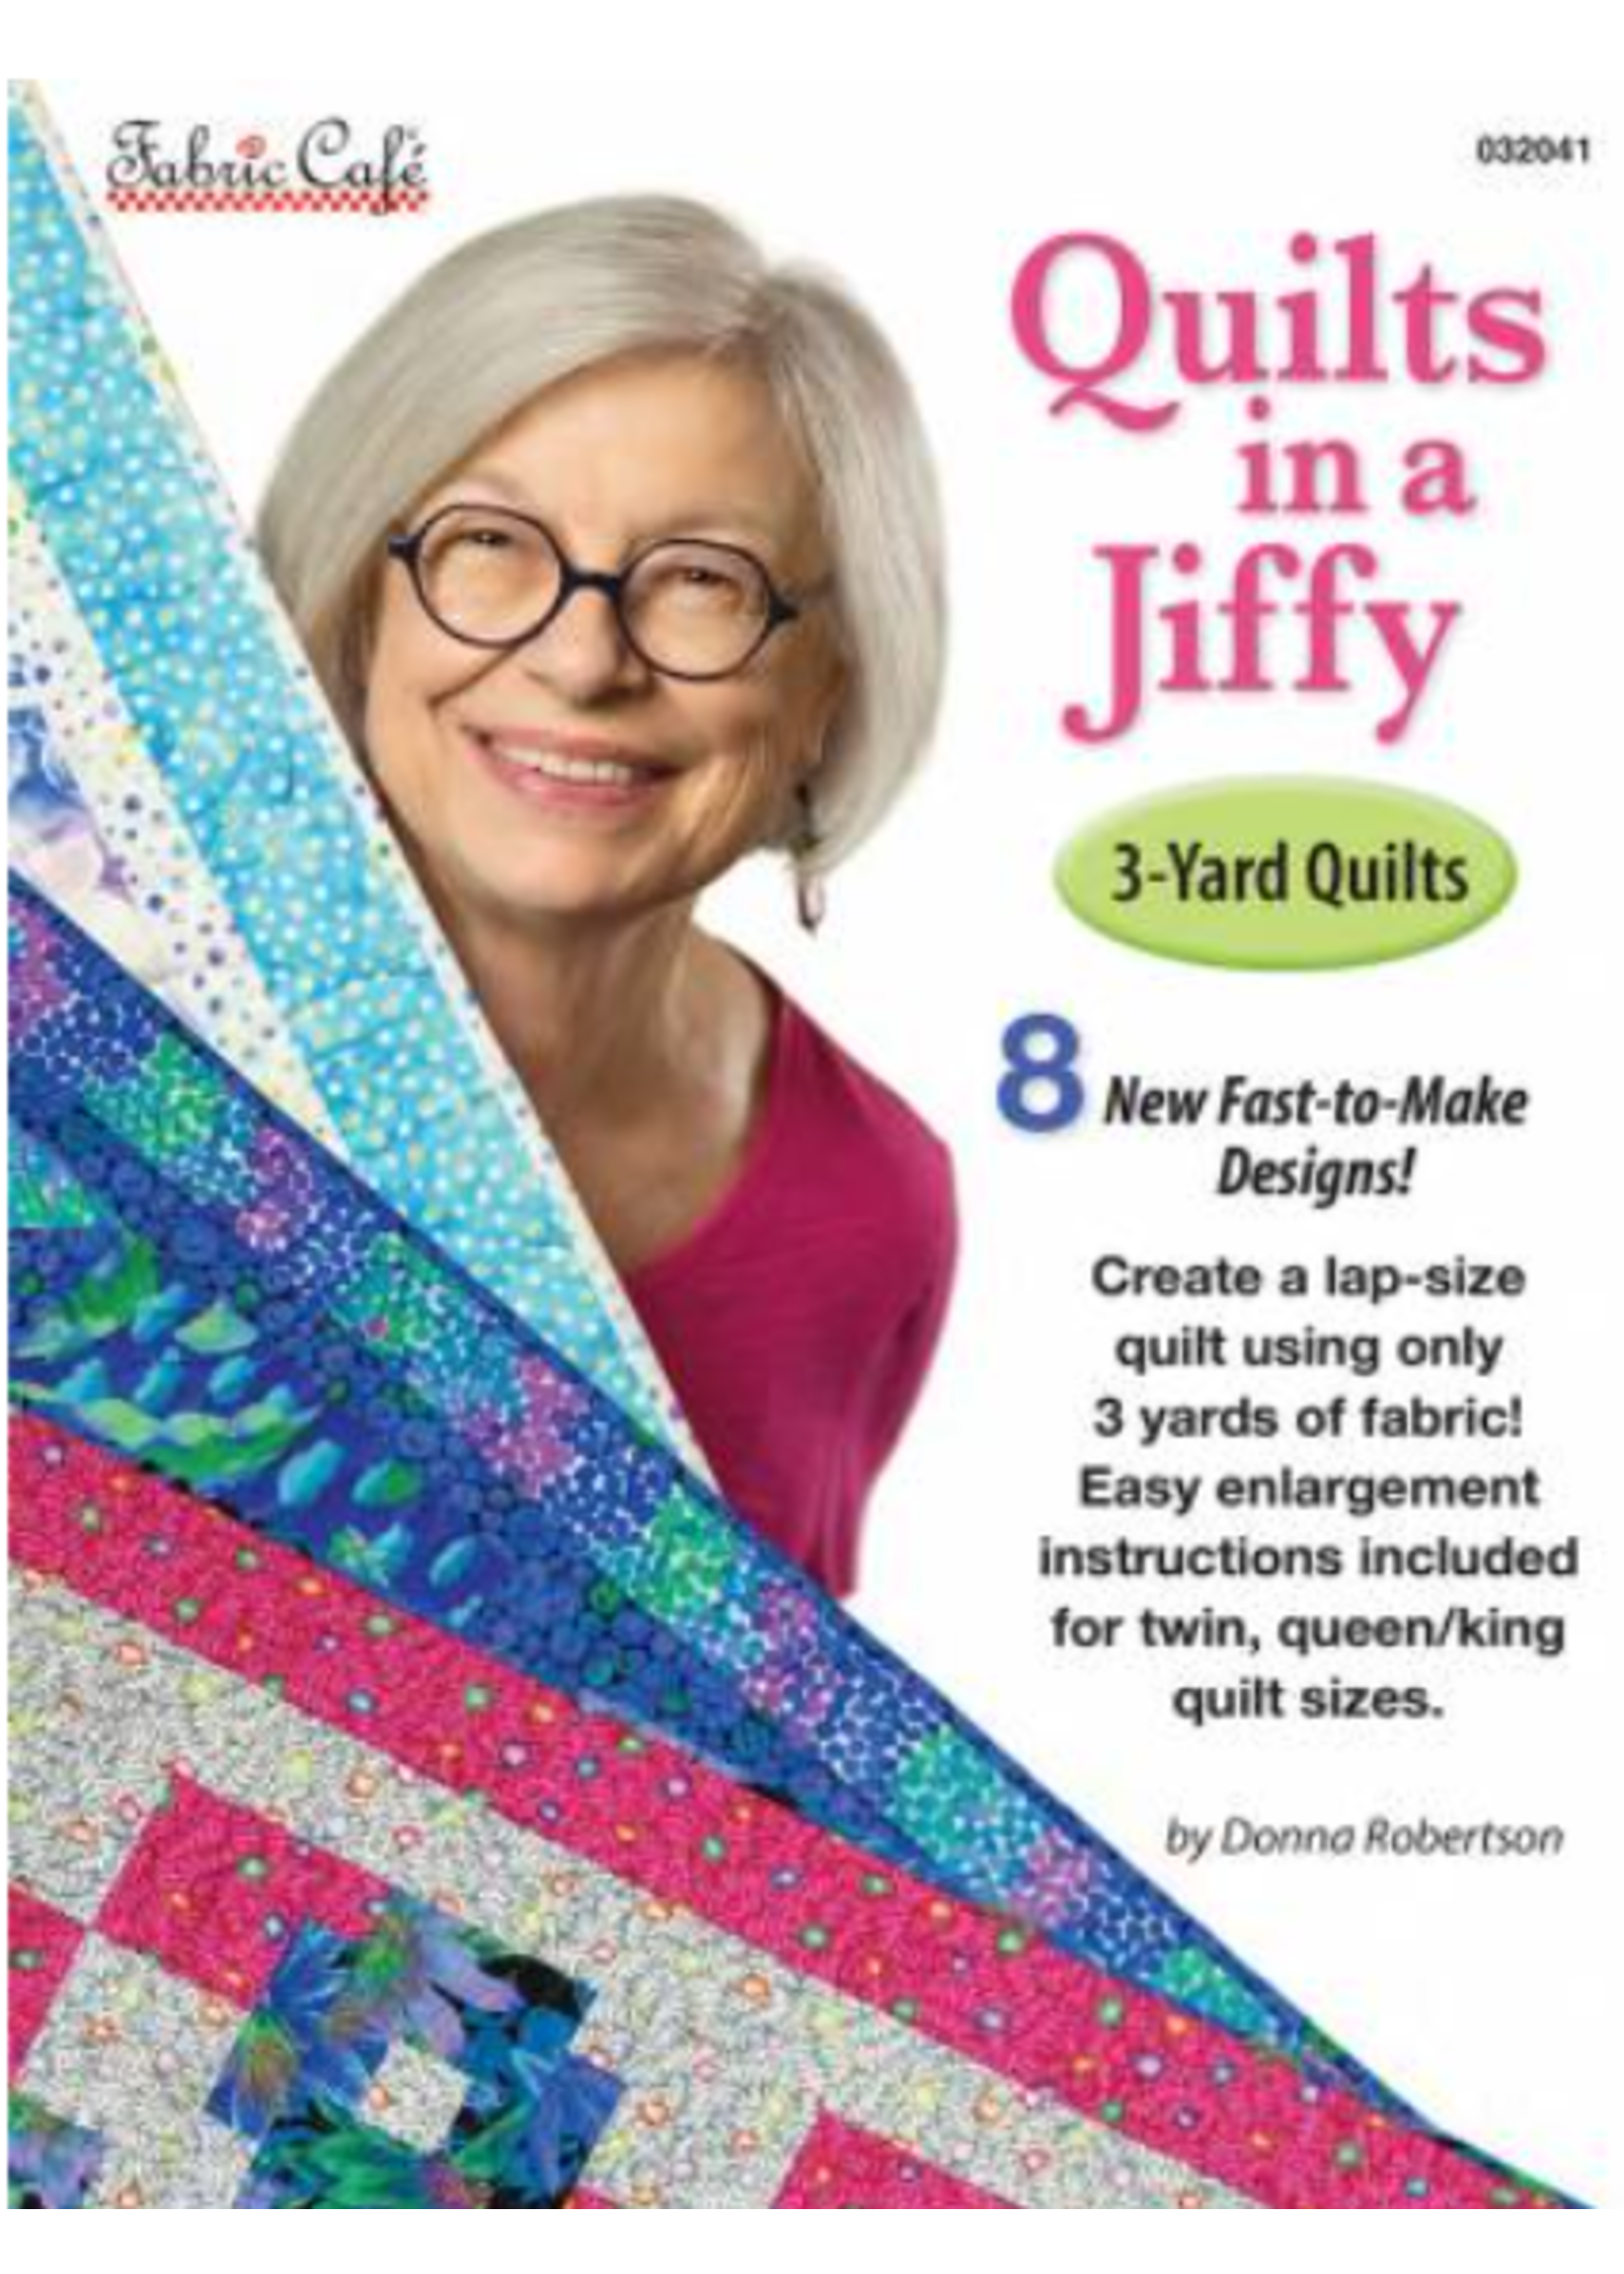 Fabric Cafe Quilts in a Jiffy